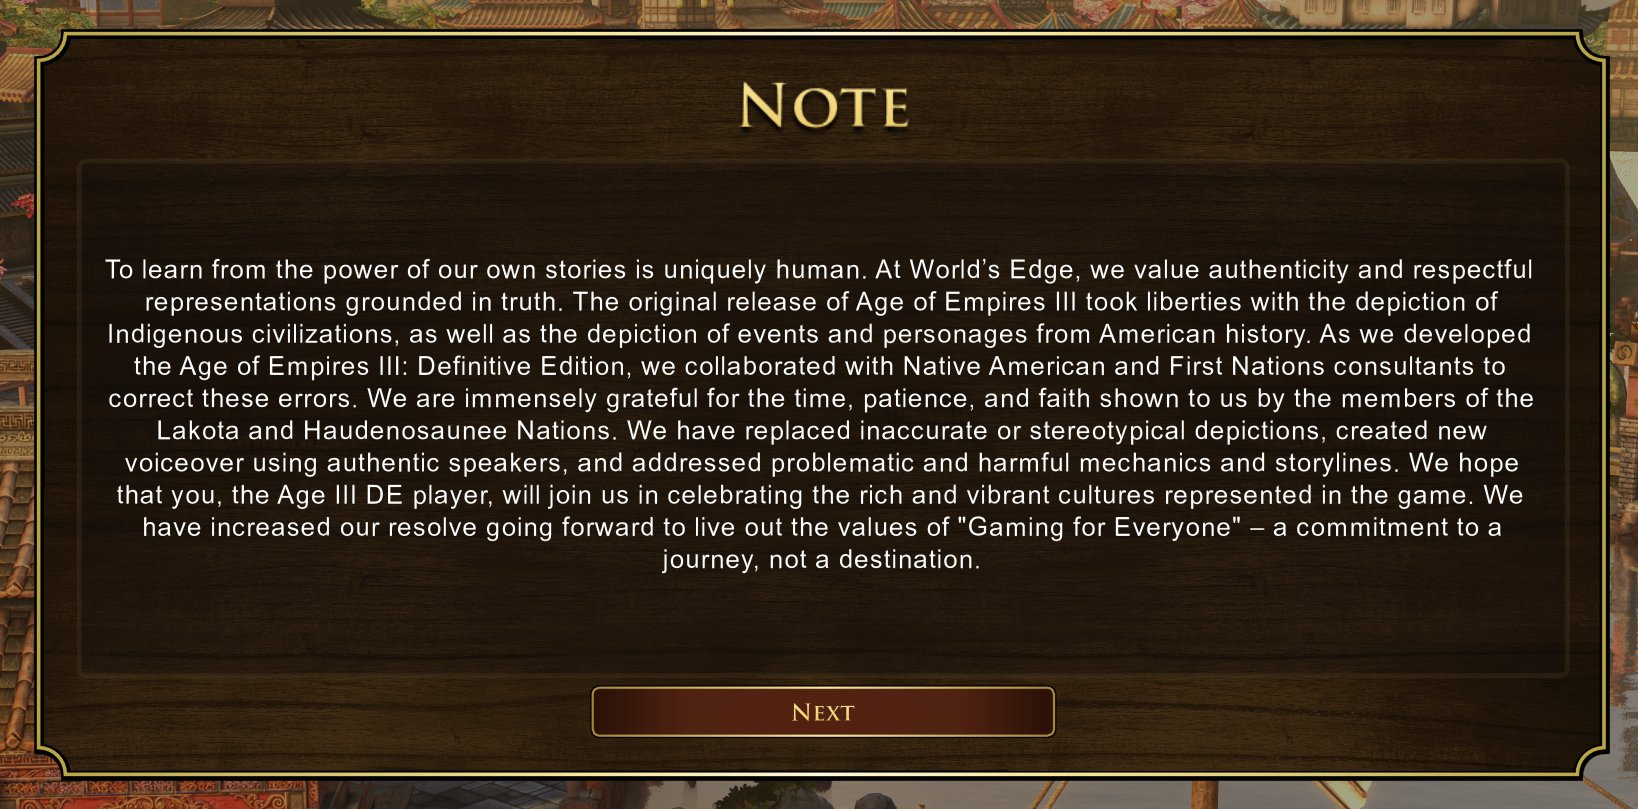 age of empires 3 note